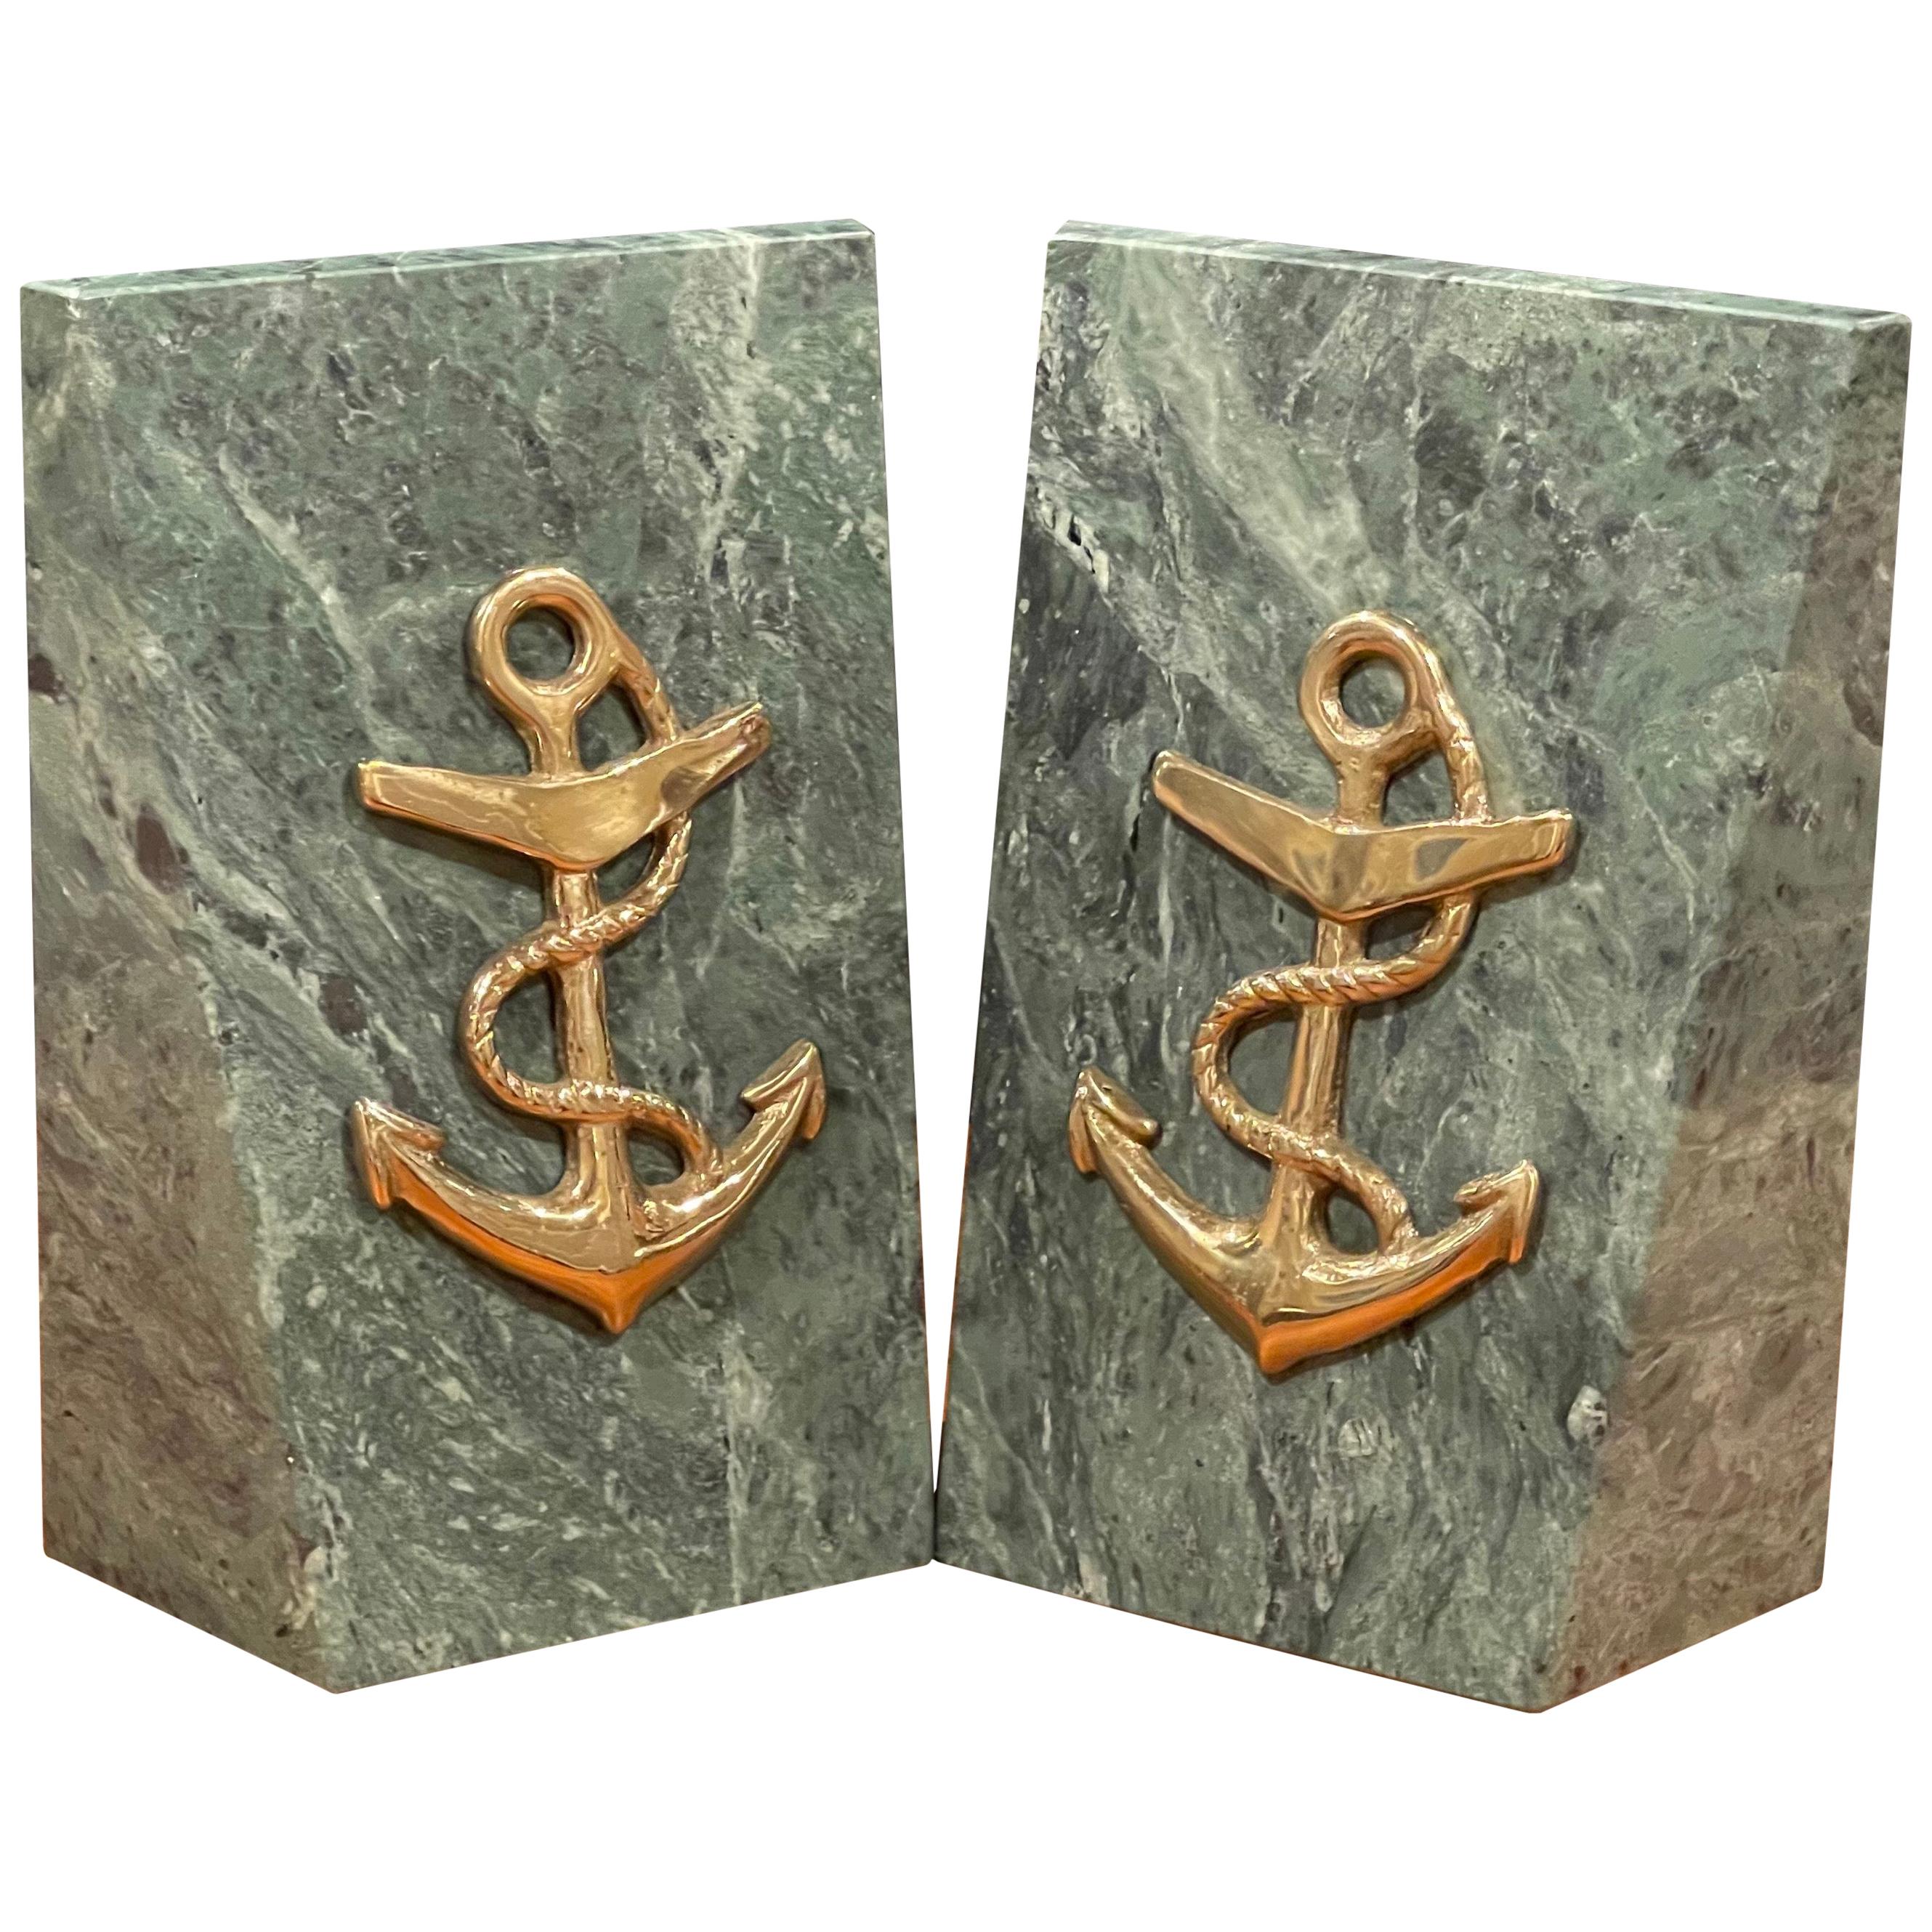 Pair of Solid Marble Bookends with Brass Anchor